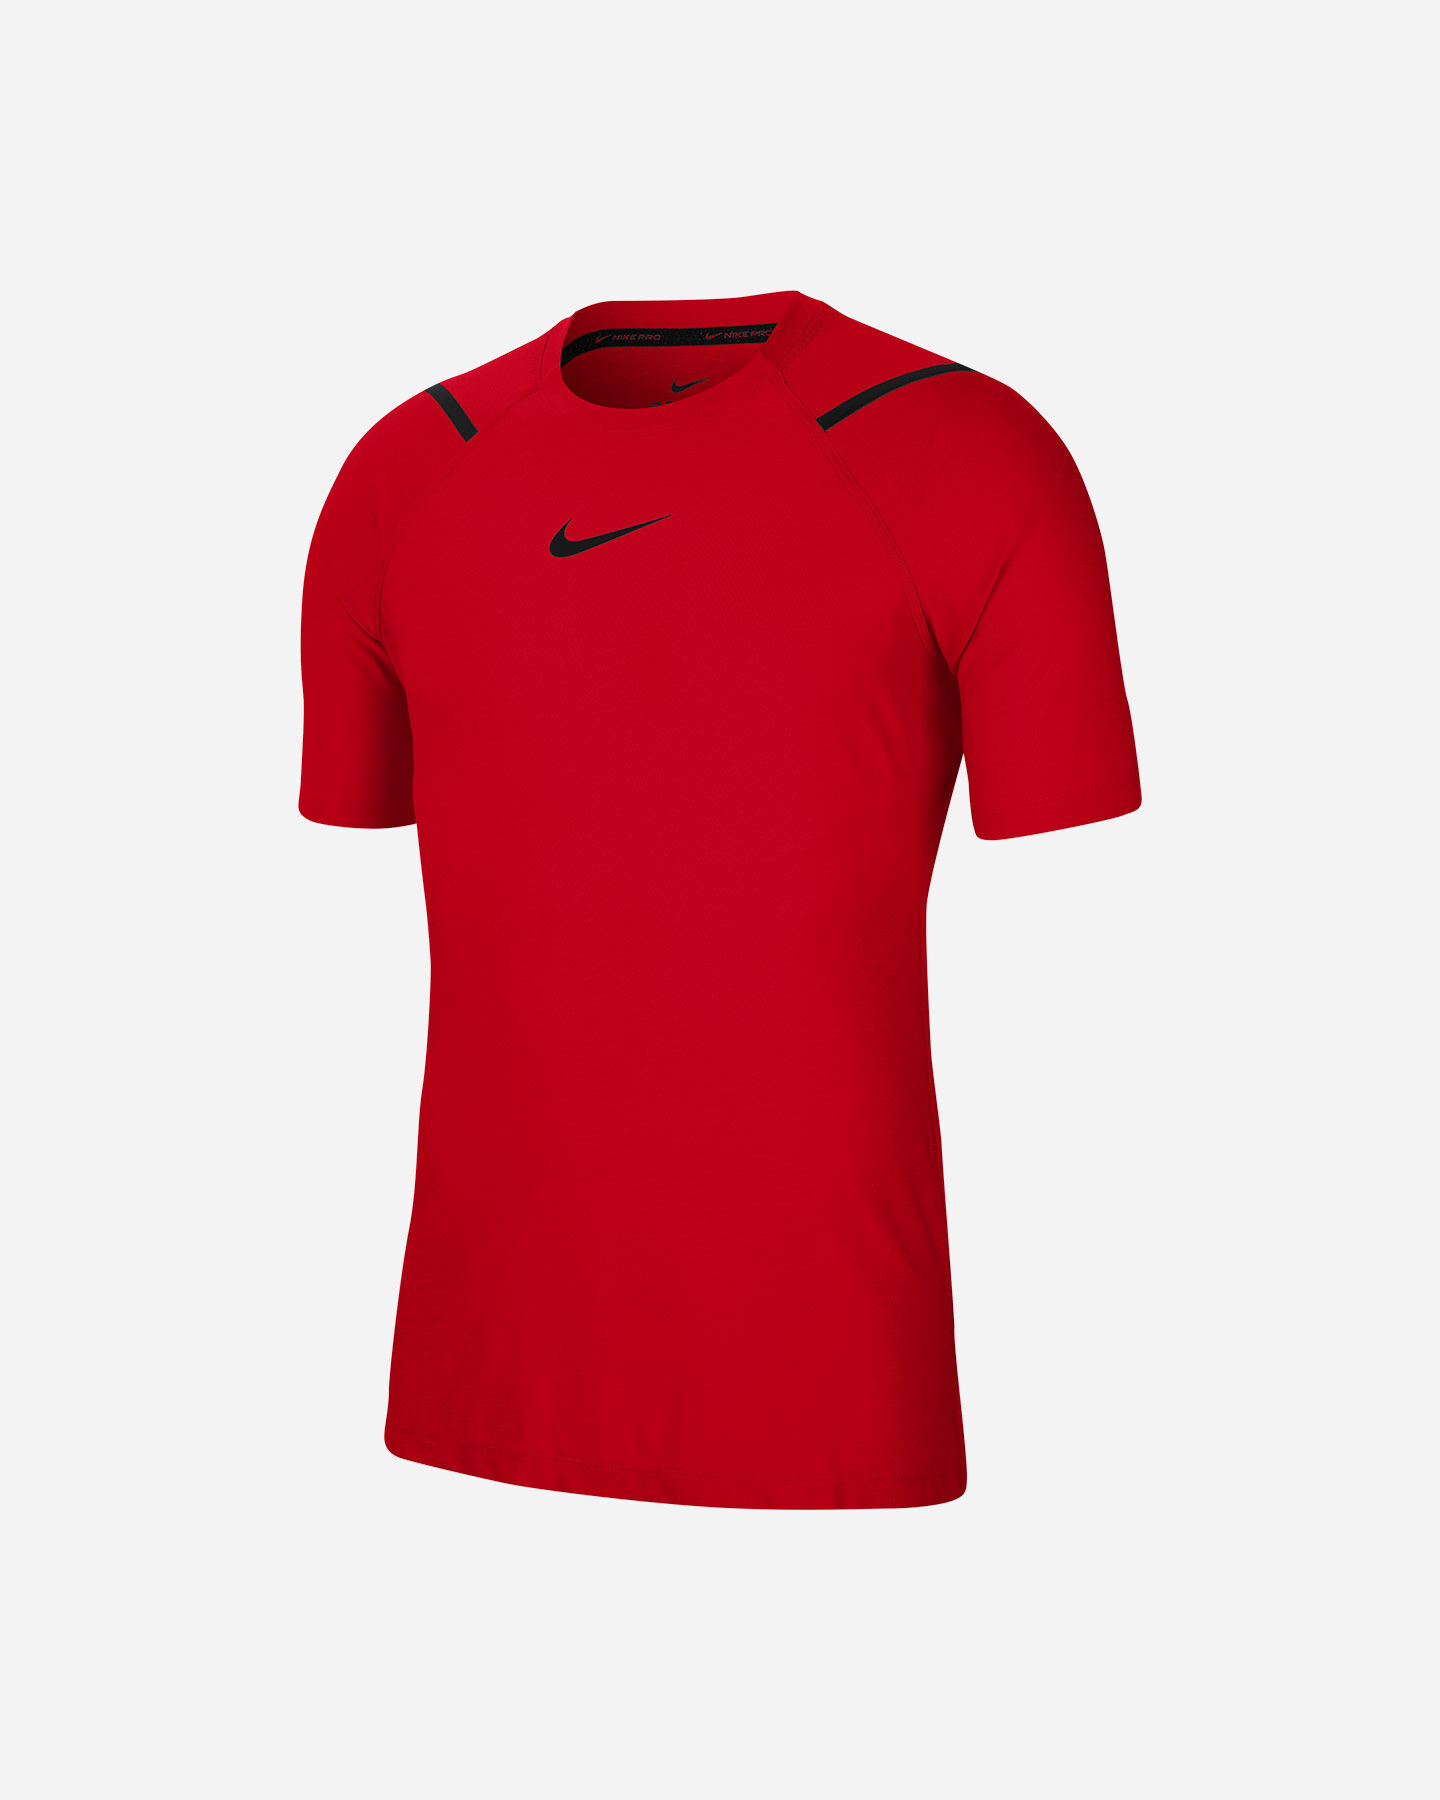  T-Shirt training NIKE PRO TOP M S5268713|657|S scatto 0